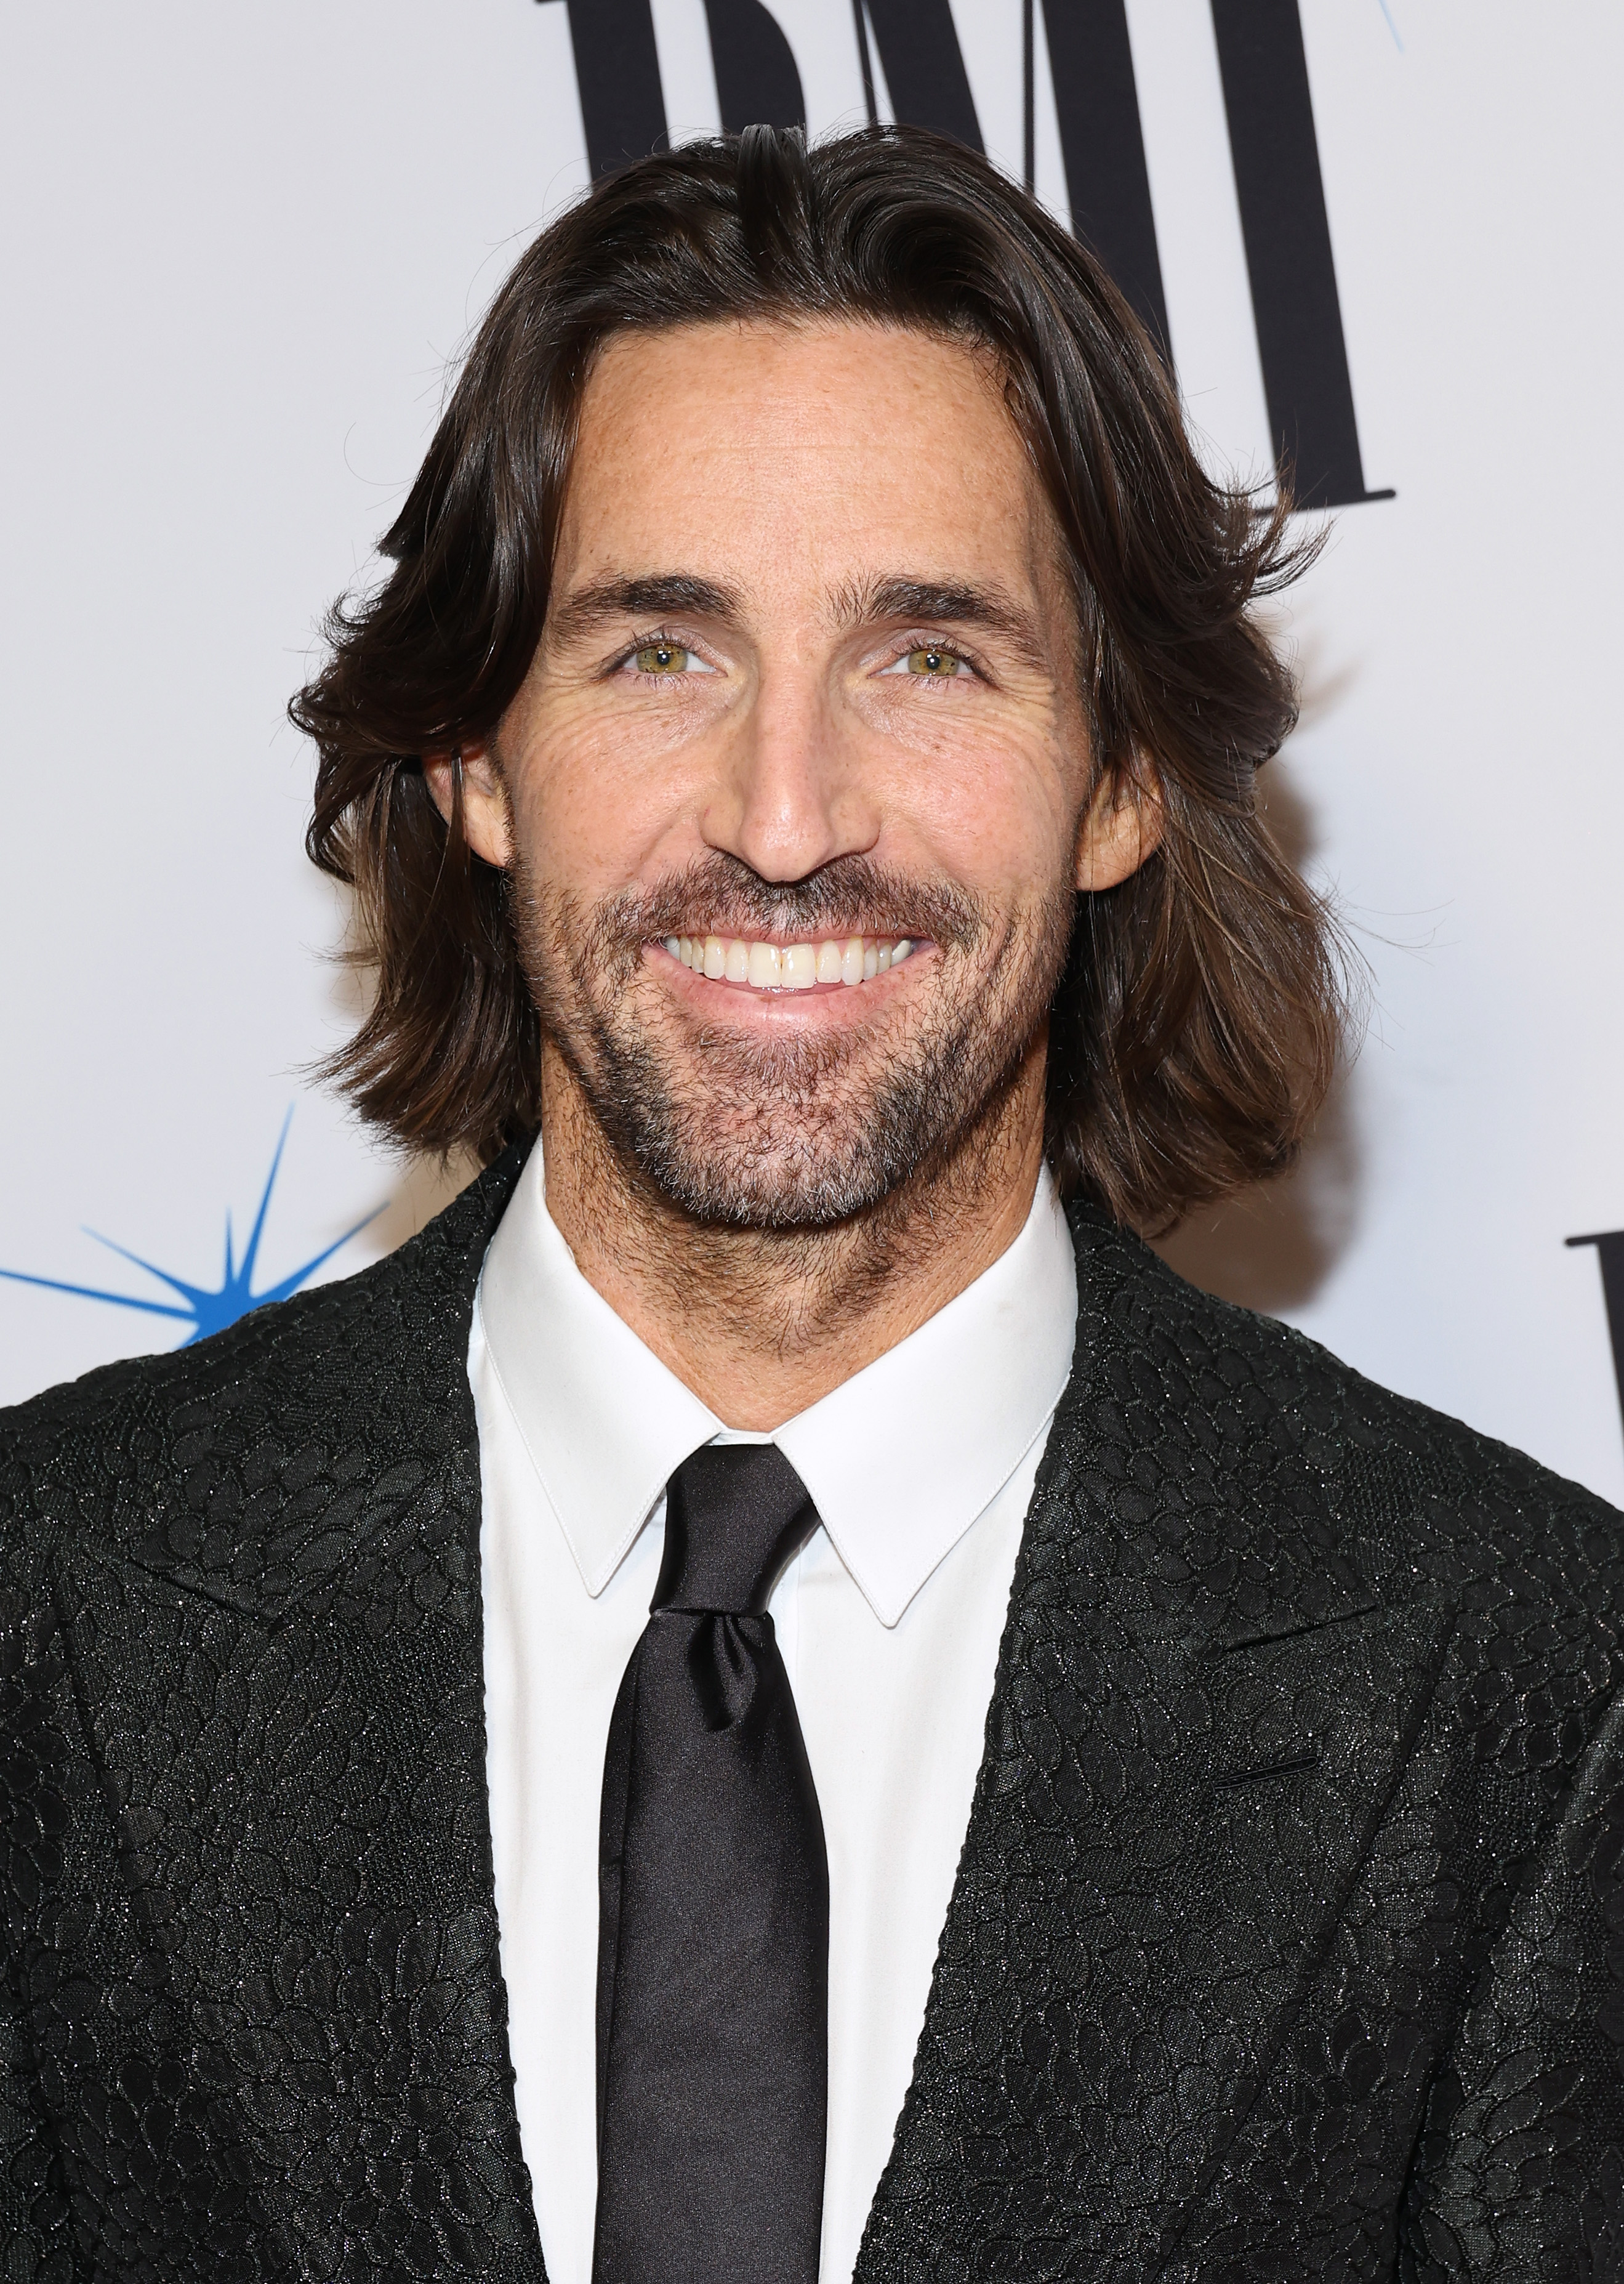 Jake Owen at the 2022 BMI Country Awards on November 8, 2022, in Nashville | Source: Getty Images